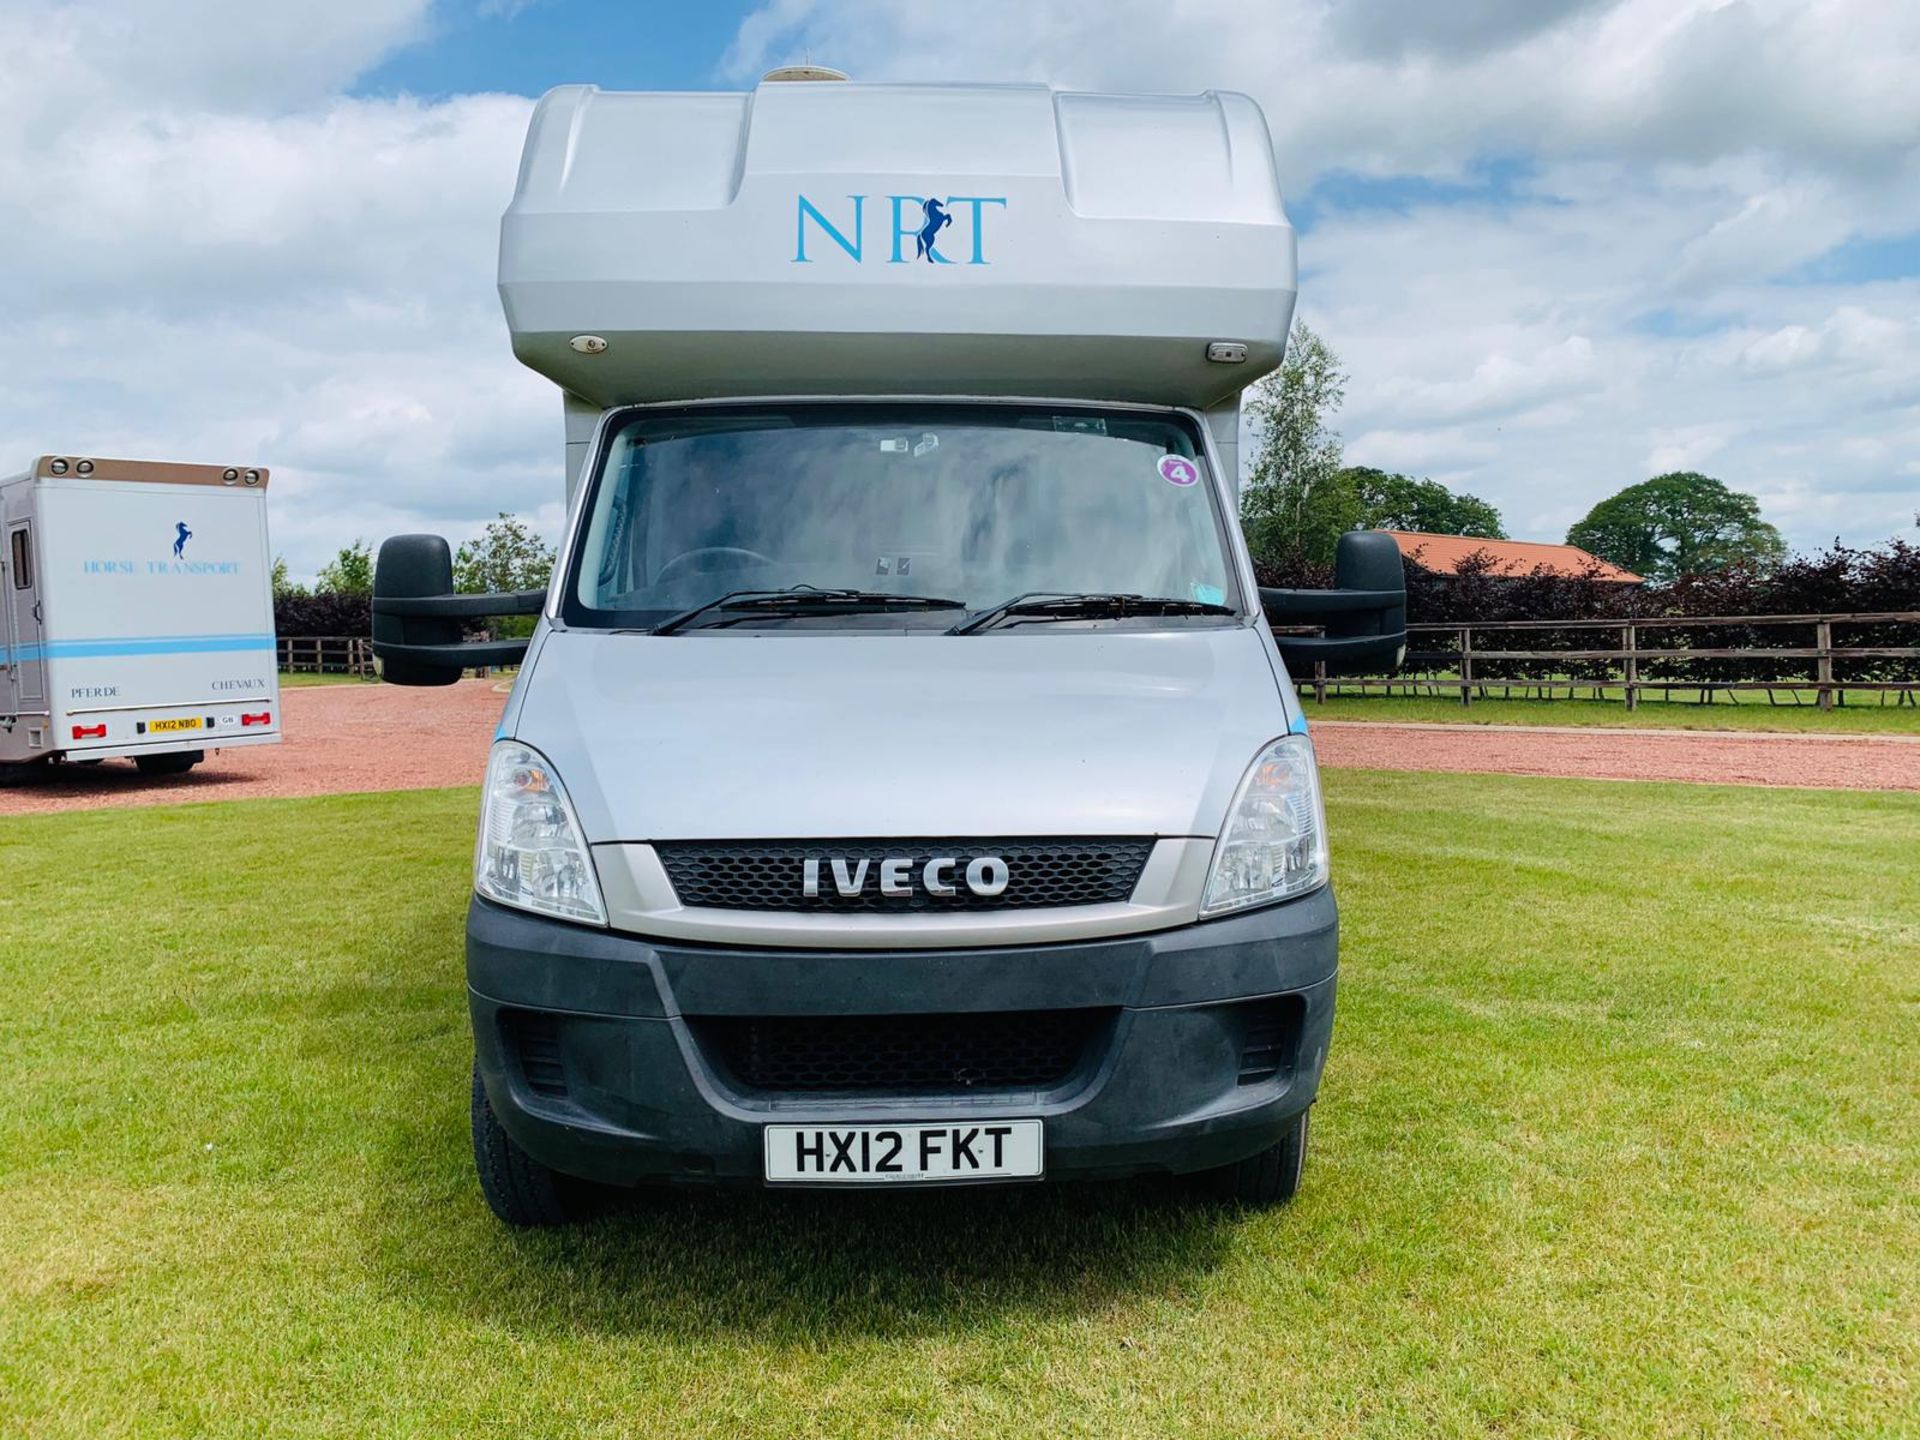 Iveco Daily 70C18 'GEORGE SMITH' Horsebox - 2012 12 Reg - Air Con - Image 2 of 35